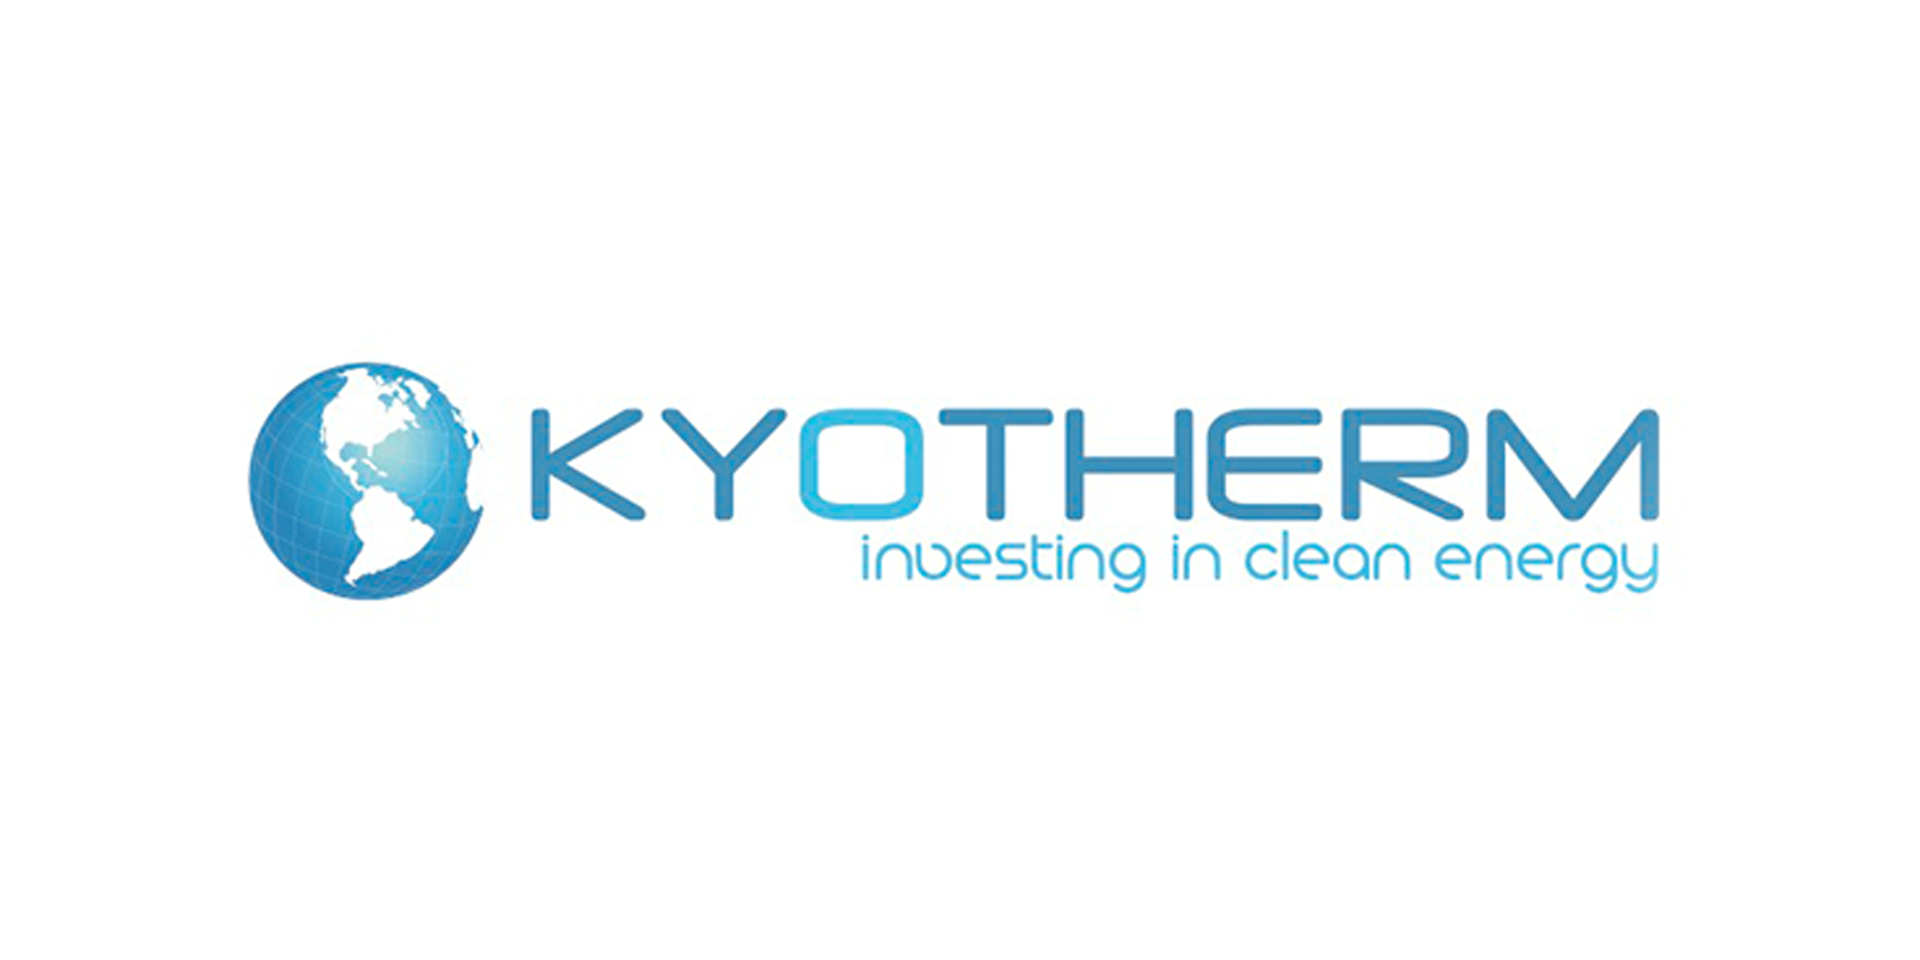 Kyotherm logo with text "investing in clean energy"